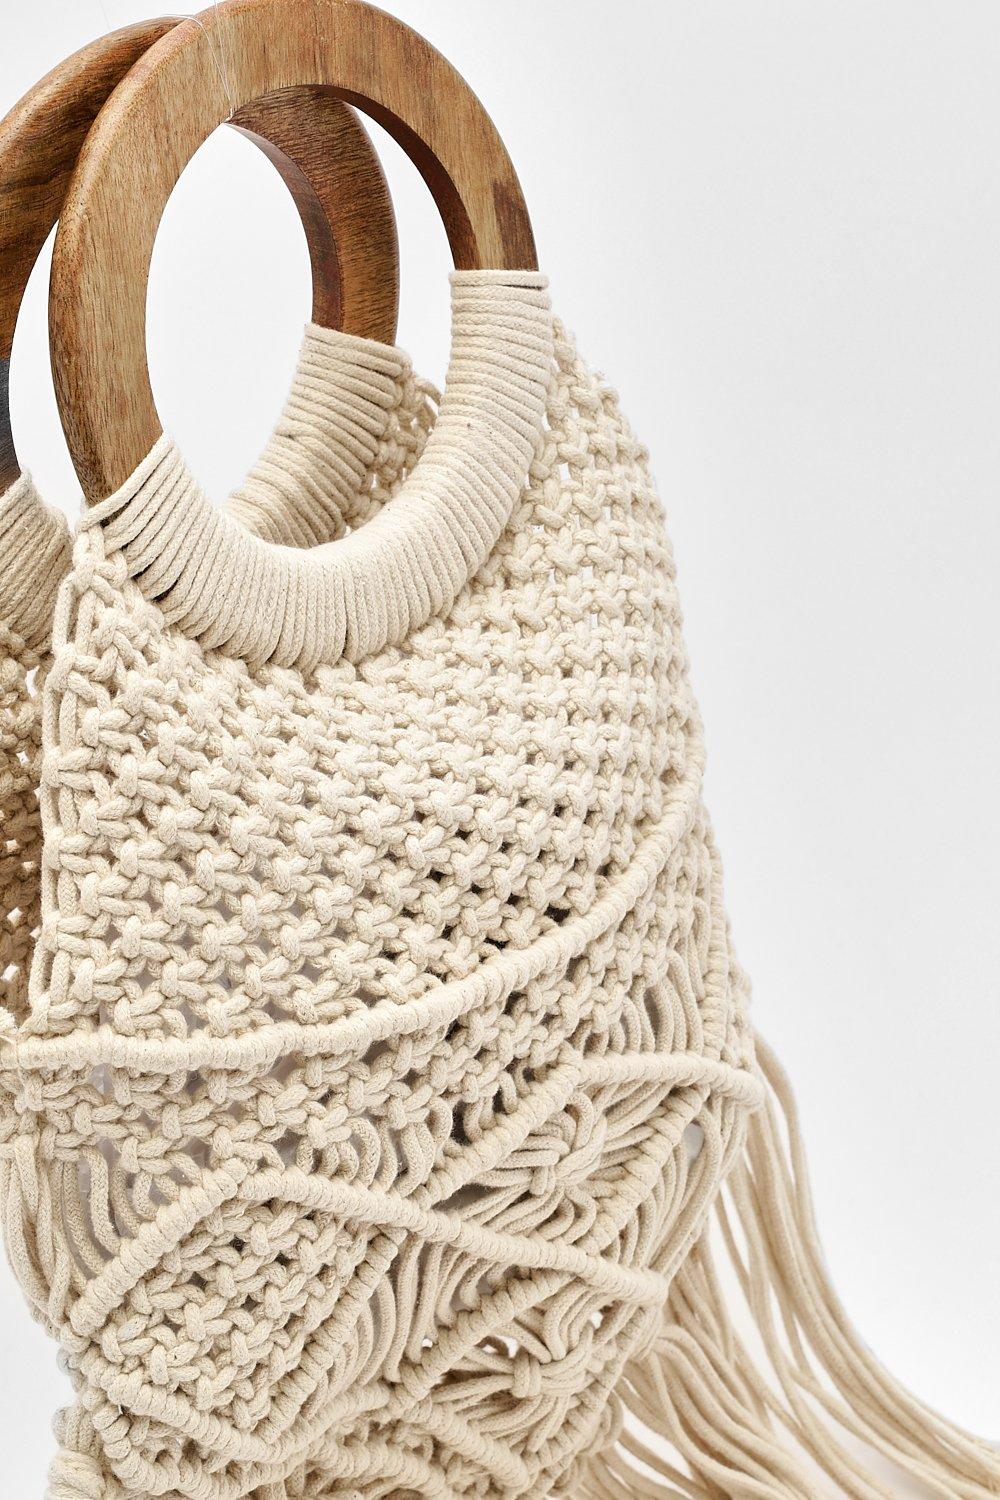 Easy Crochet Bag made with T-Shirt Yarn and Wooden Handles